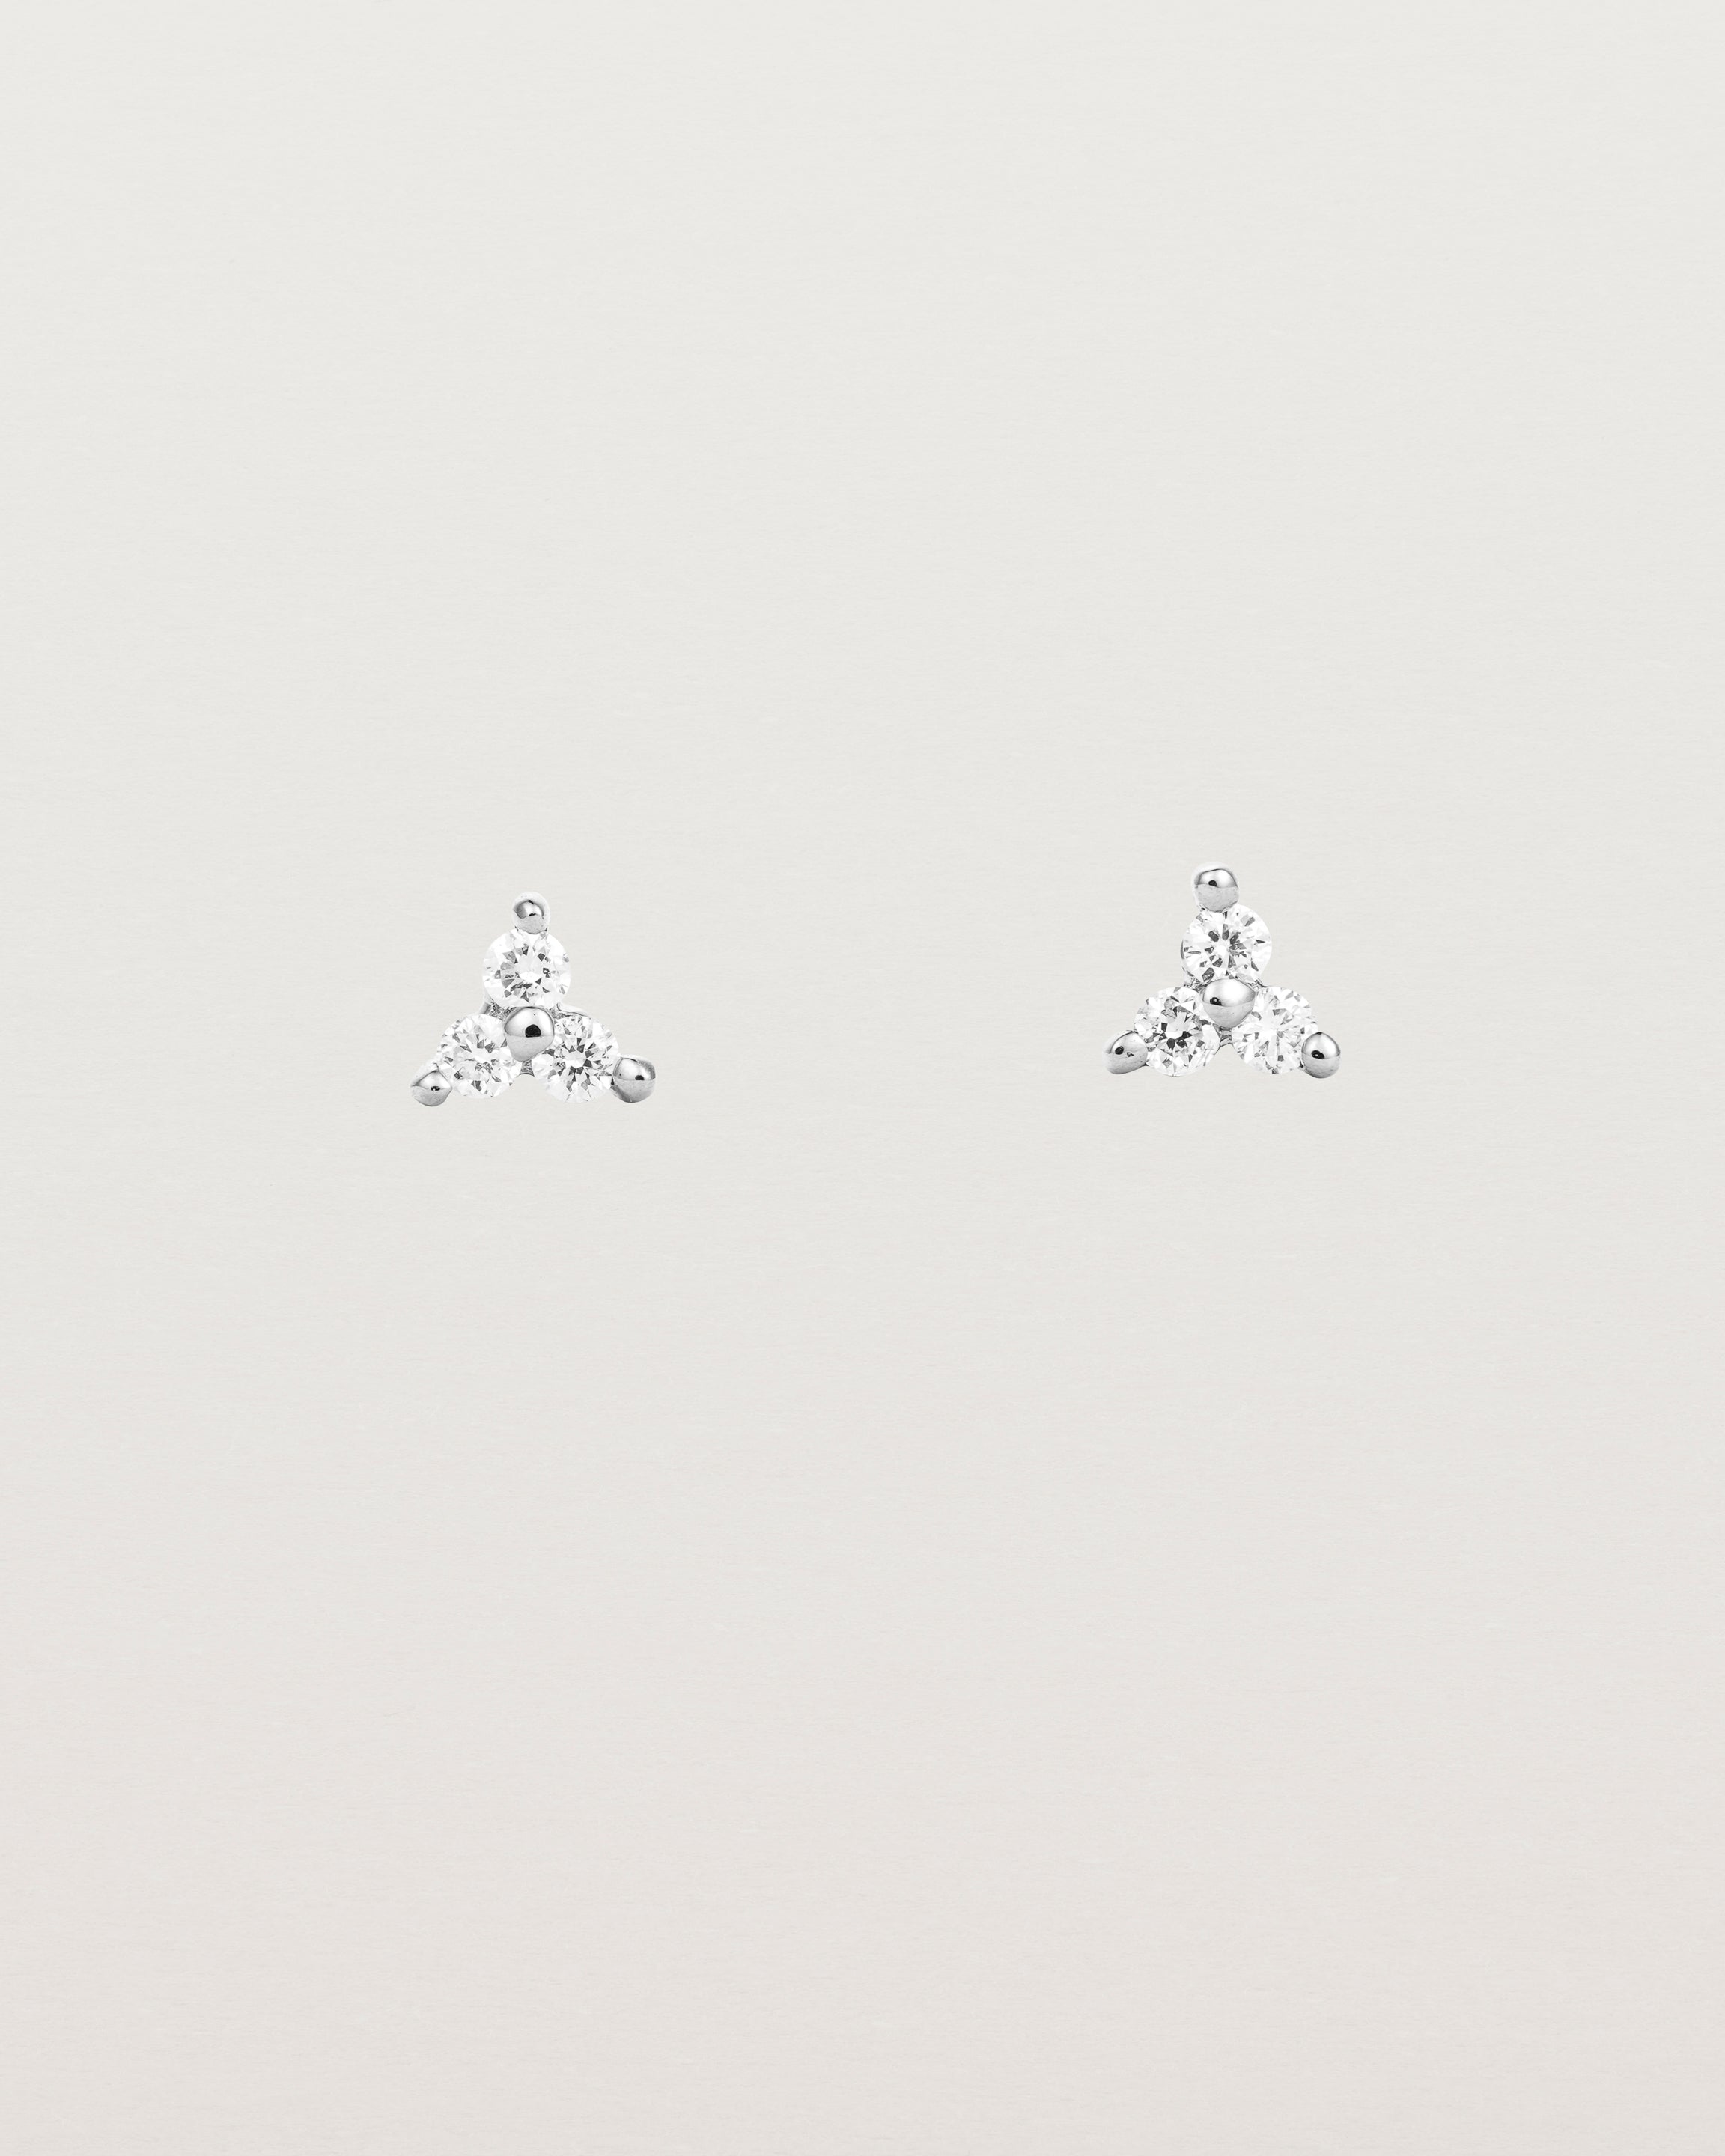 A pair of white gold studs with three small white diamonds.